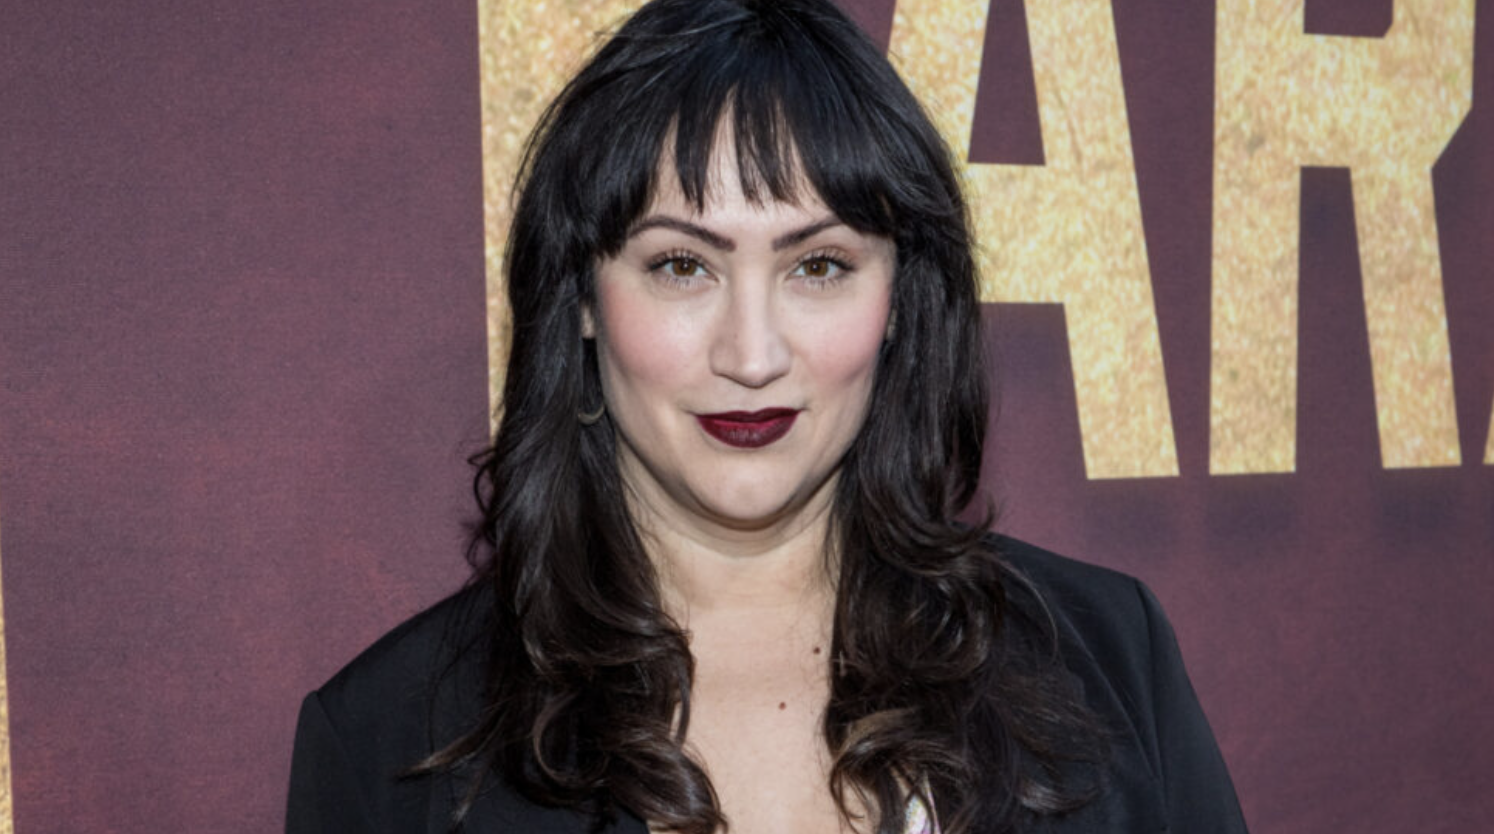 PLAYBILL ~ Lempicka Is Coming to Broadway Starring Eden Espinosa